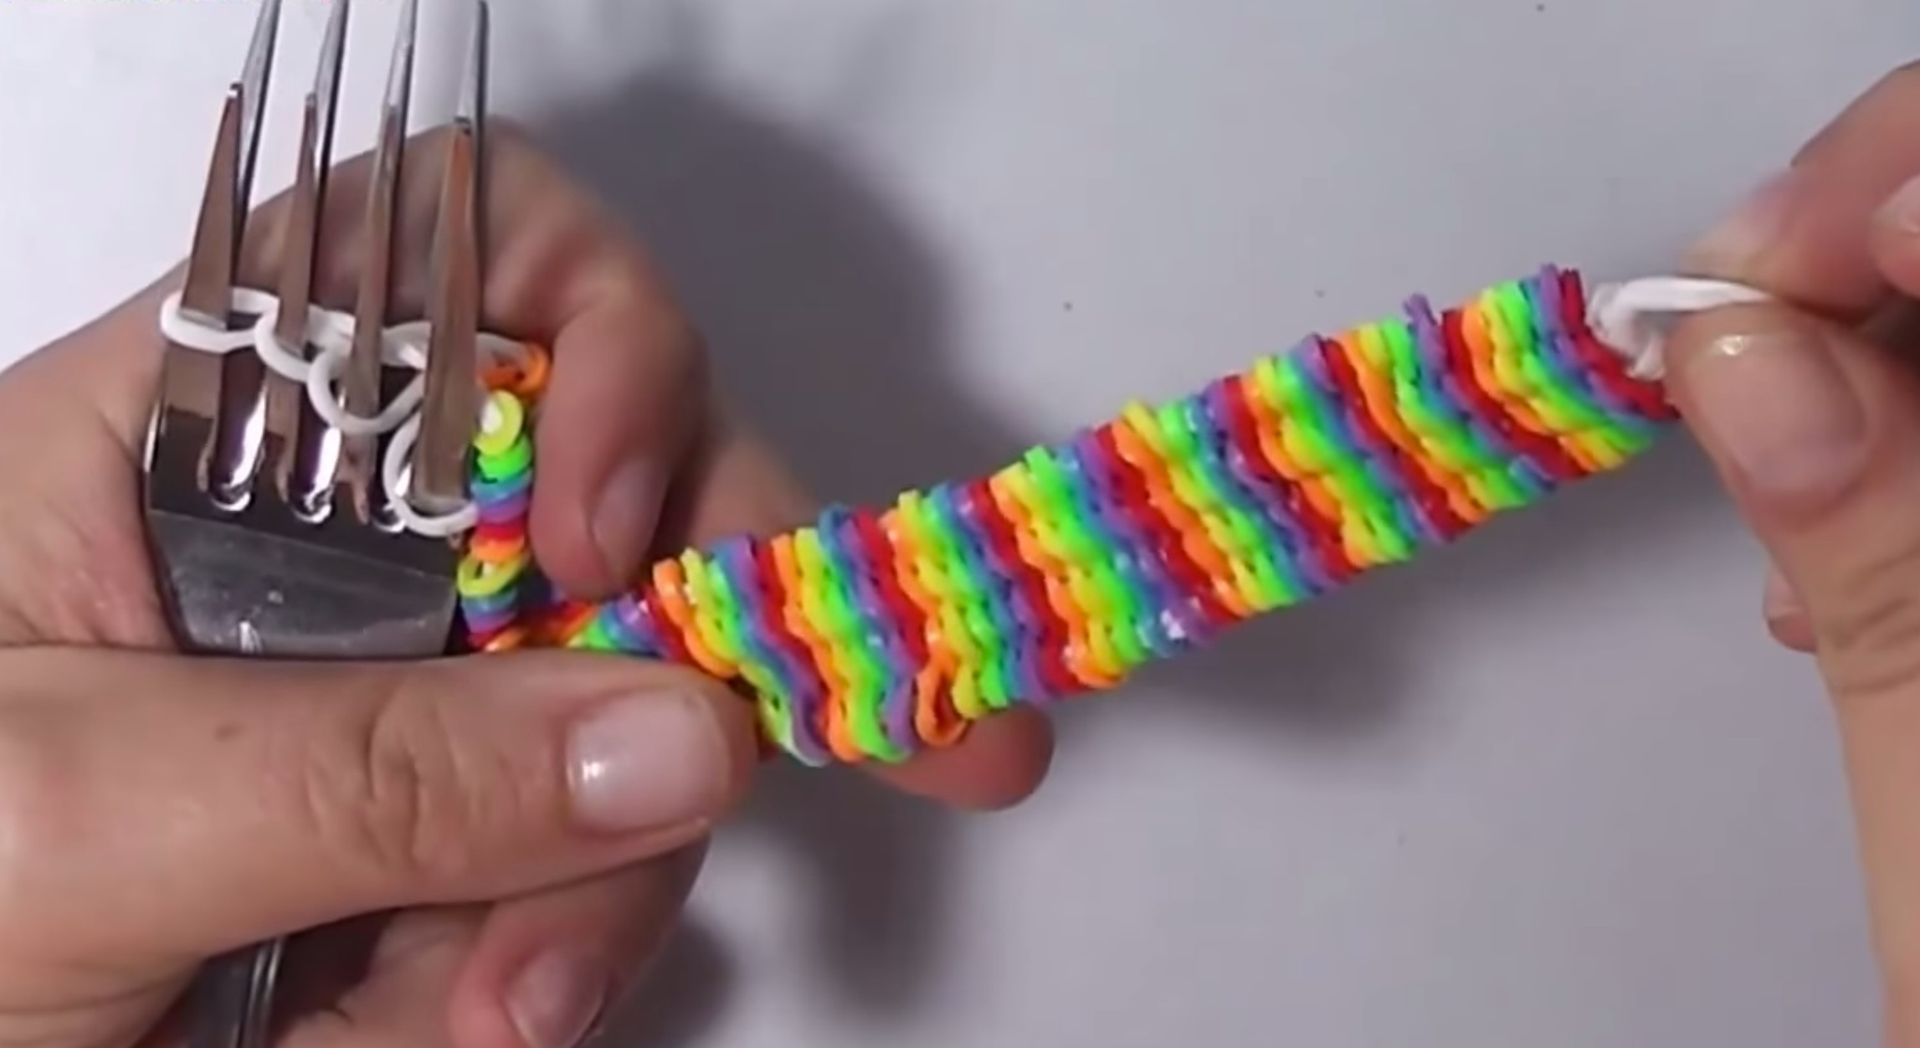 How to make the Willis loom band bracelet pattern with your fingers | Video tutorial by OlgaCrafts